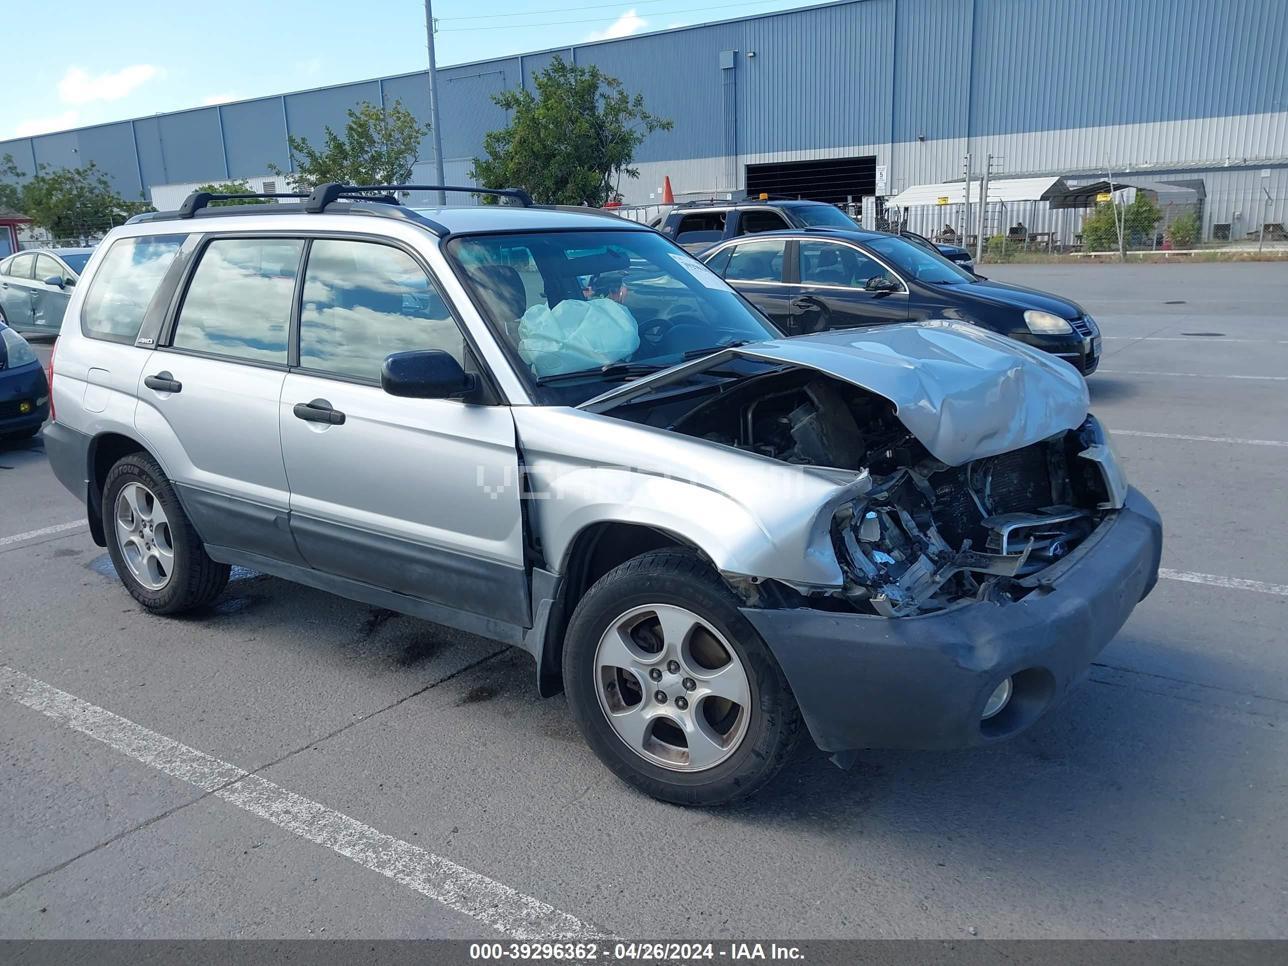 VIN: JF1SG63673H745430 - subaru forester